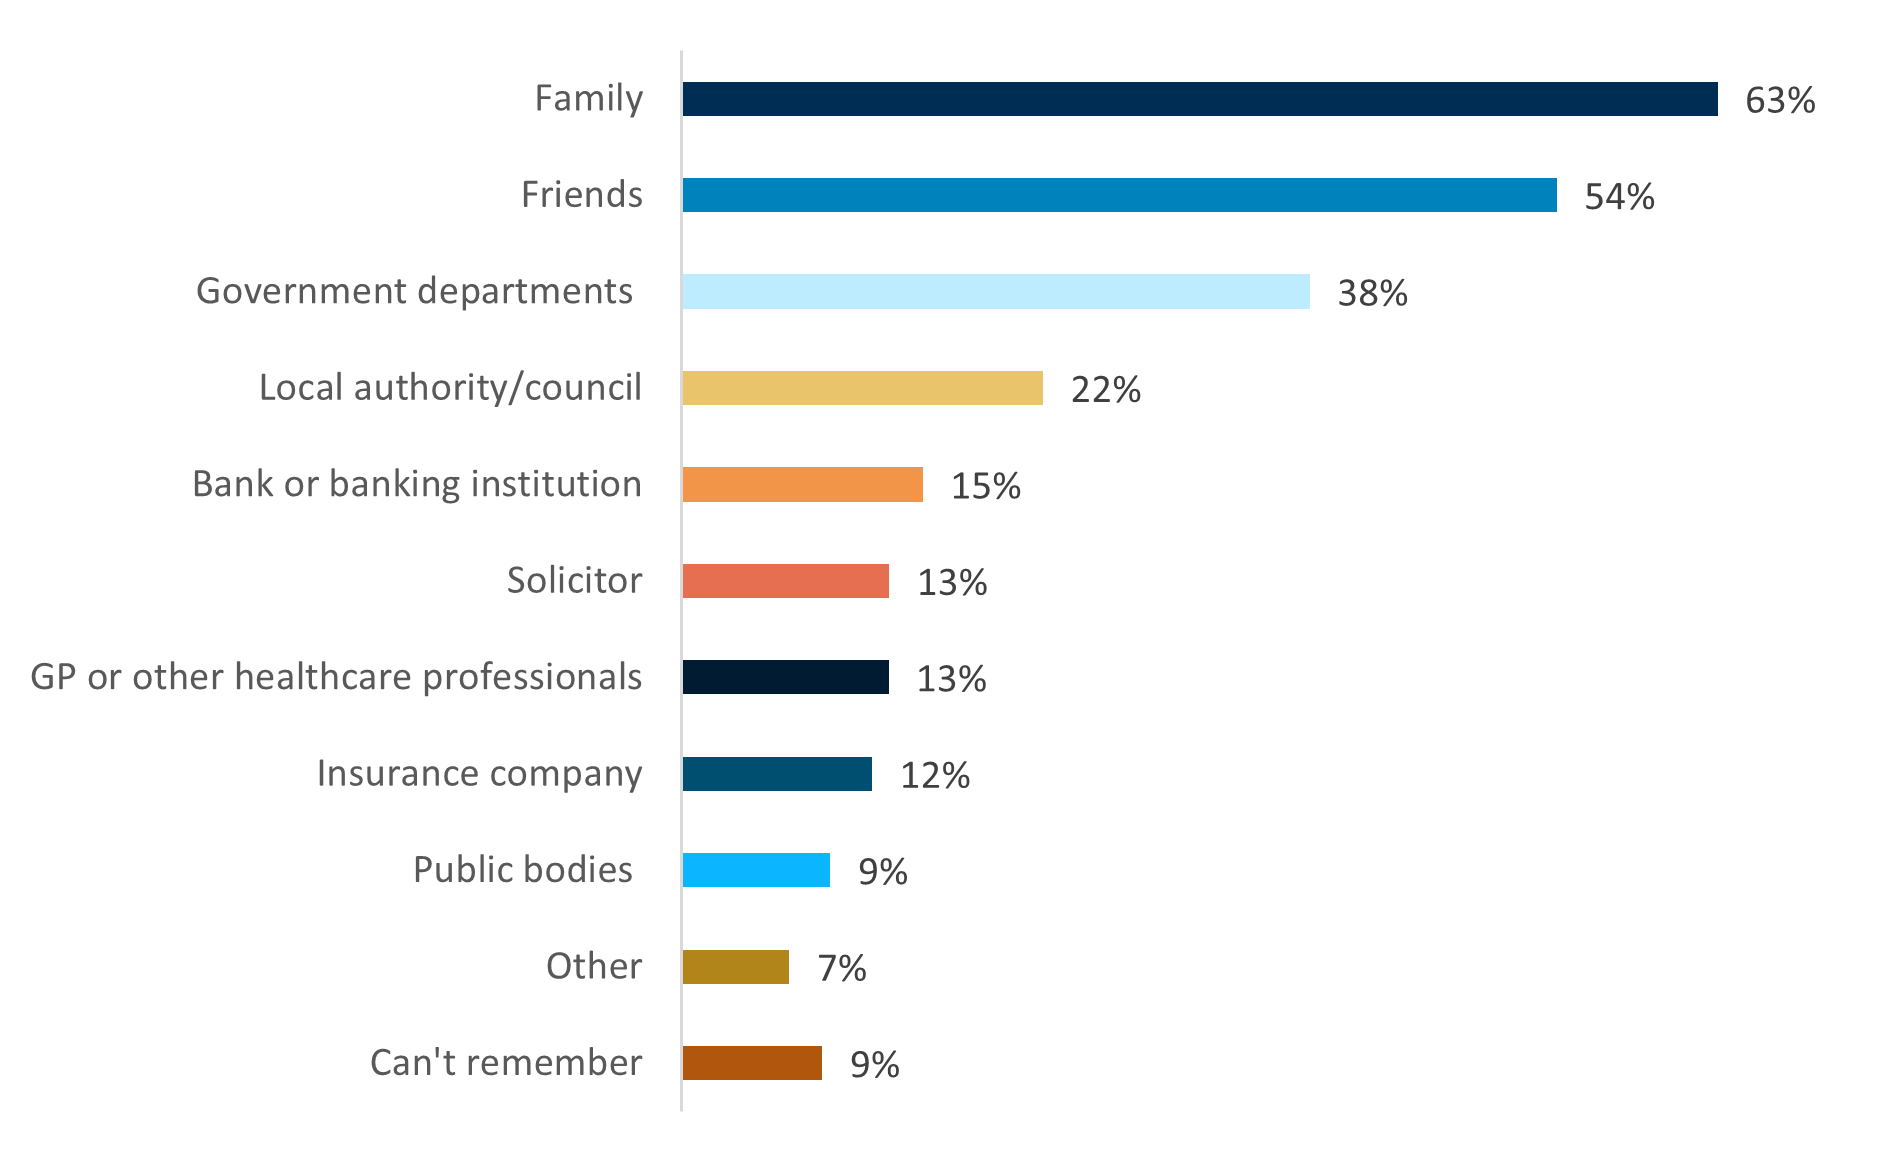 Figure 1 shows that family are the most likely recipient of letters from consumers at 63%, friends at 54%, government departments at 38%, local authority/council 22%, bank or banking institution 15%, solicitor 13%, GP or other healthcare is 13%, insurance company 12%, public bodies is 9%, other 7%, can't remember 9%. 